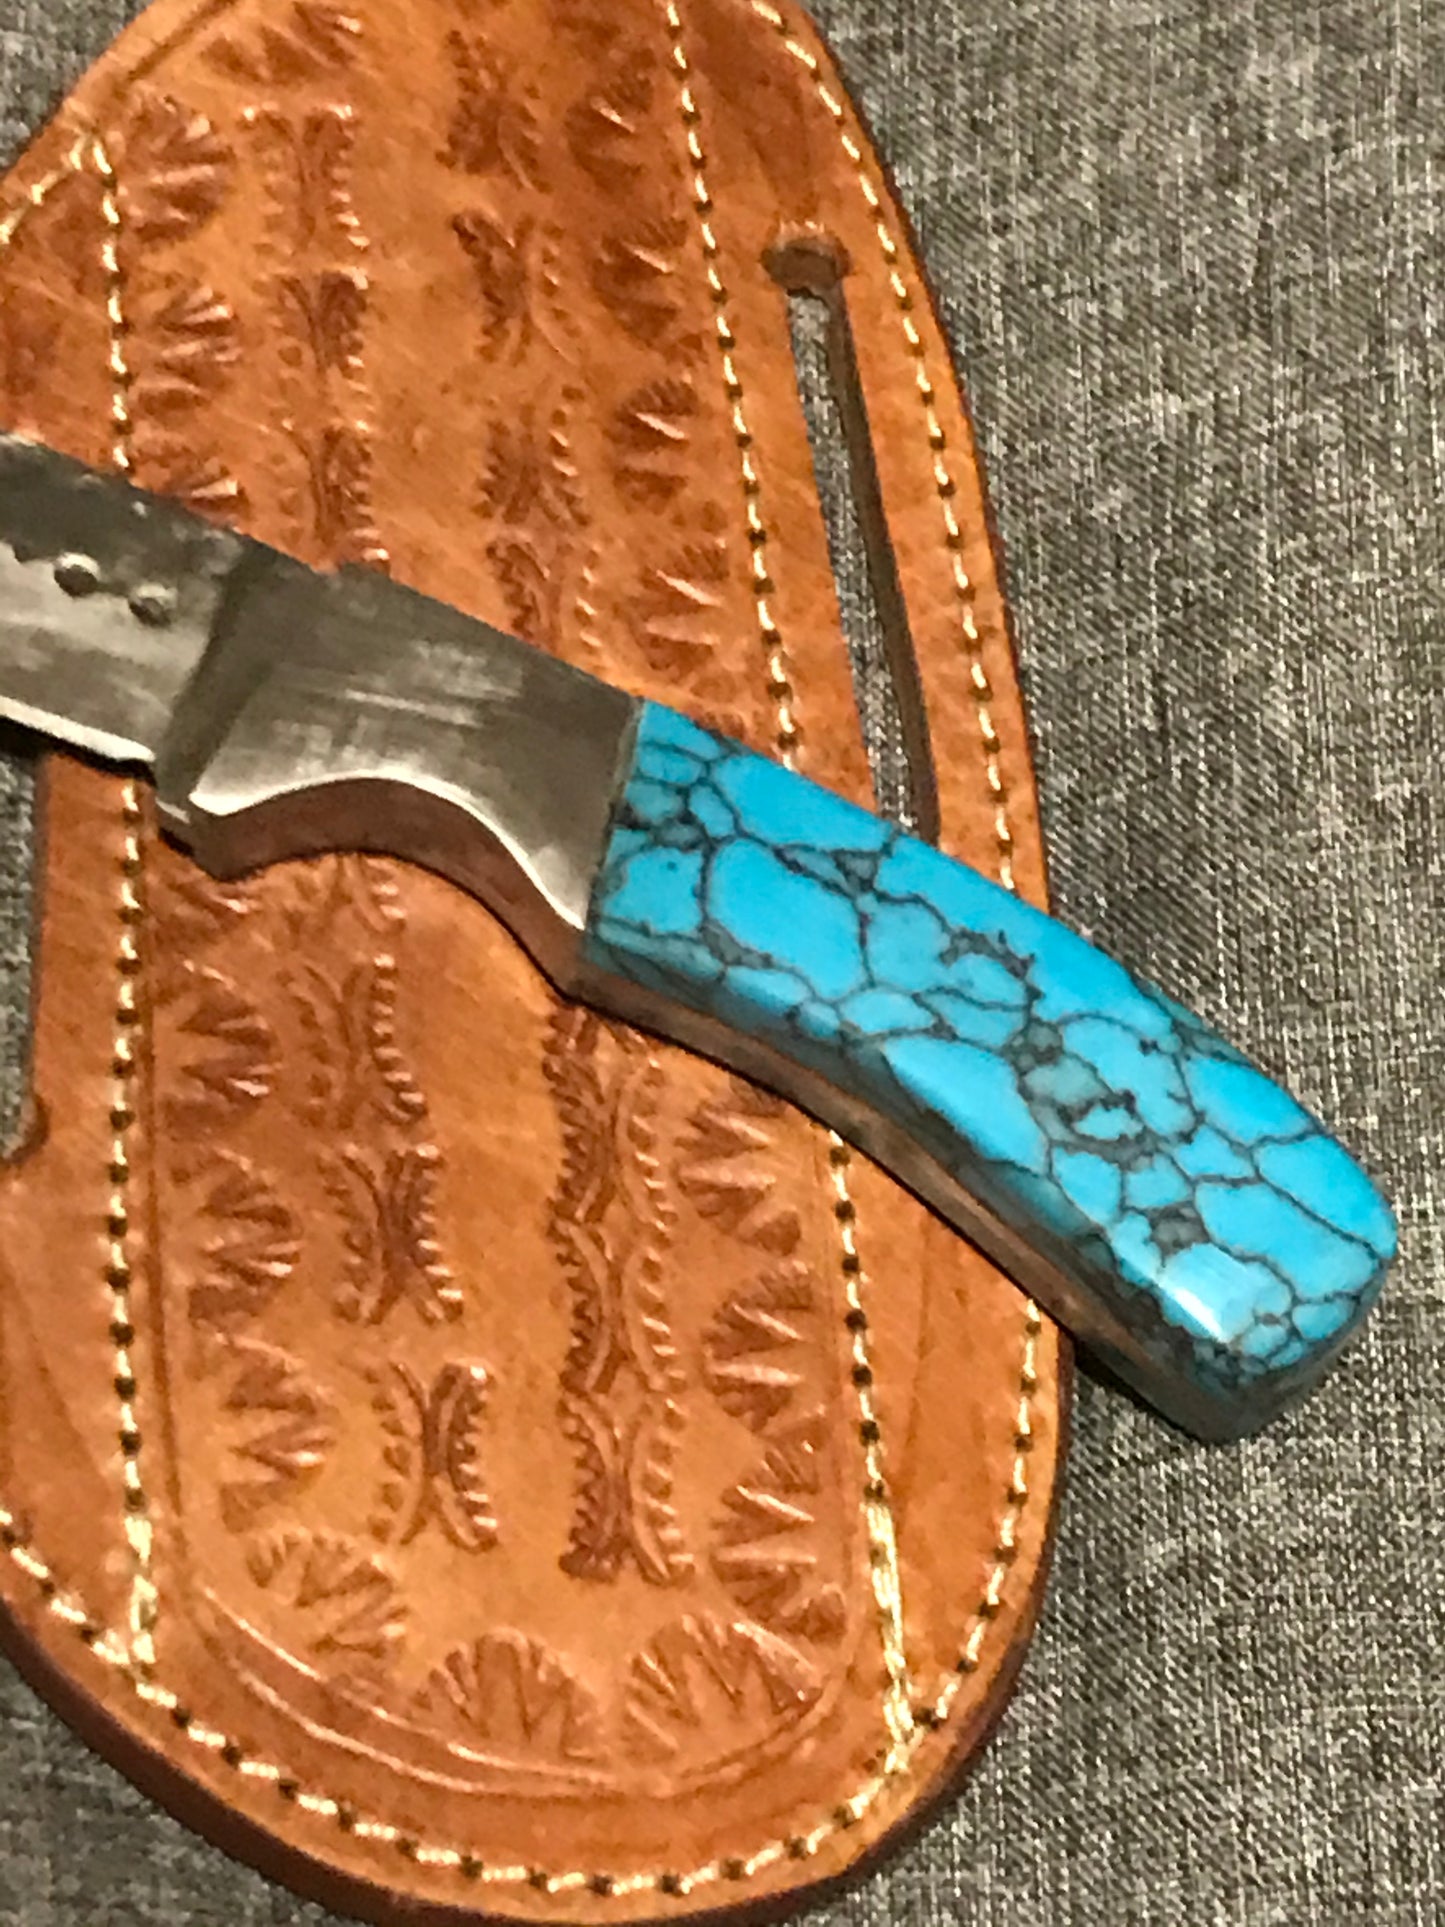 FX-114 Turquoise Handle 440c  steel Small Hunting Knife